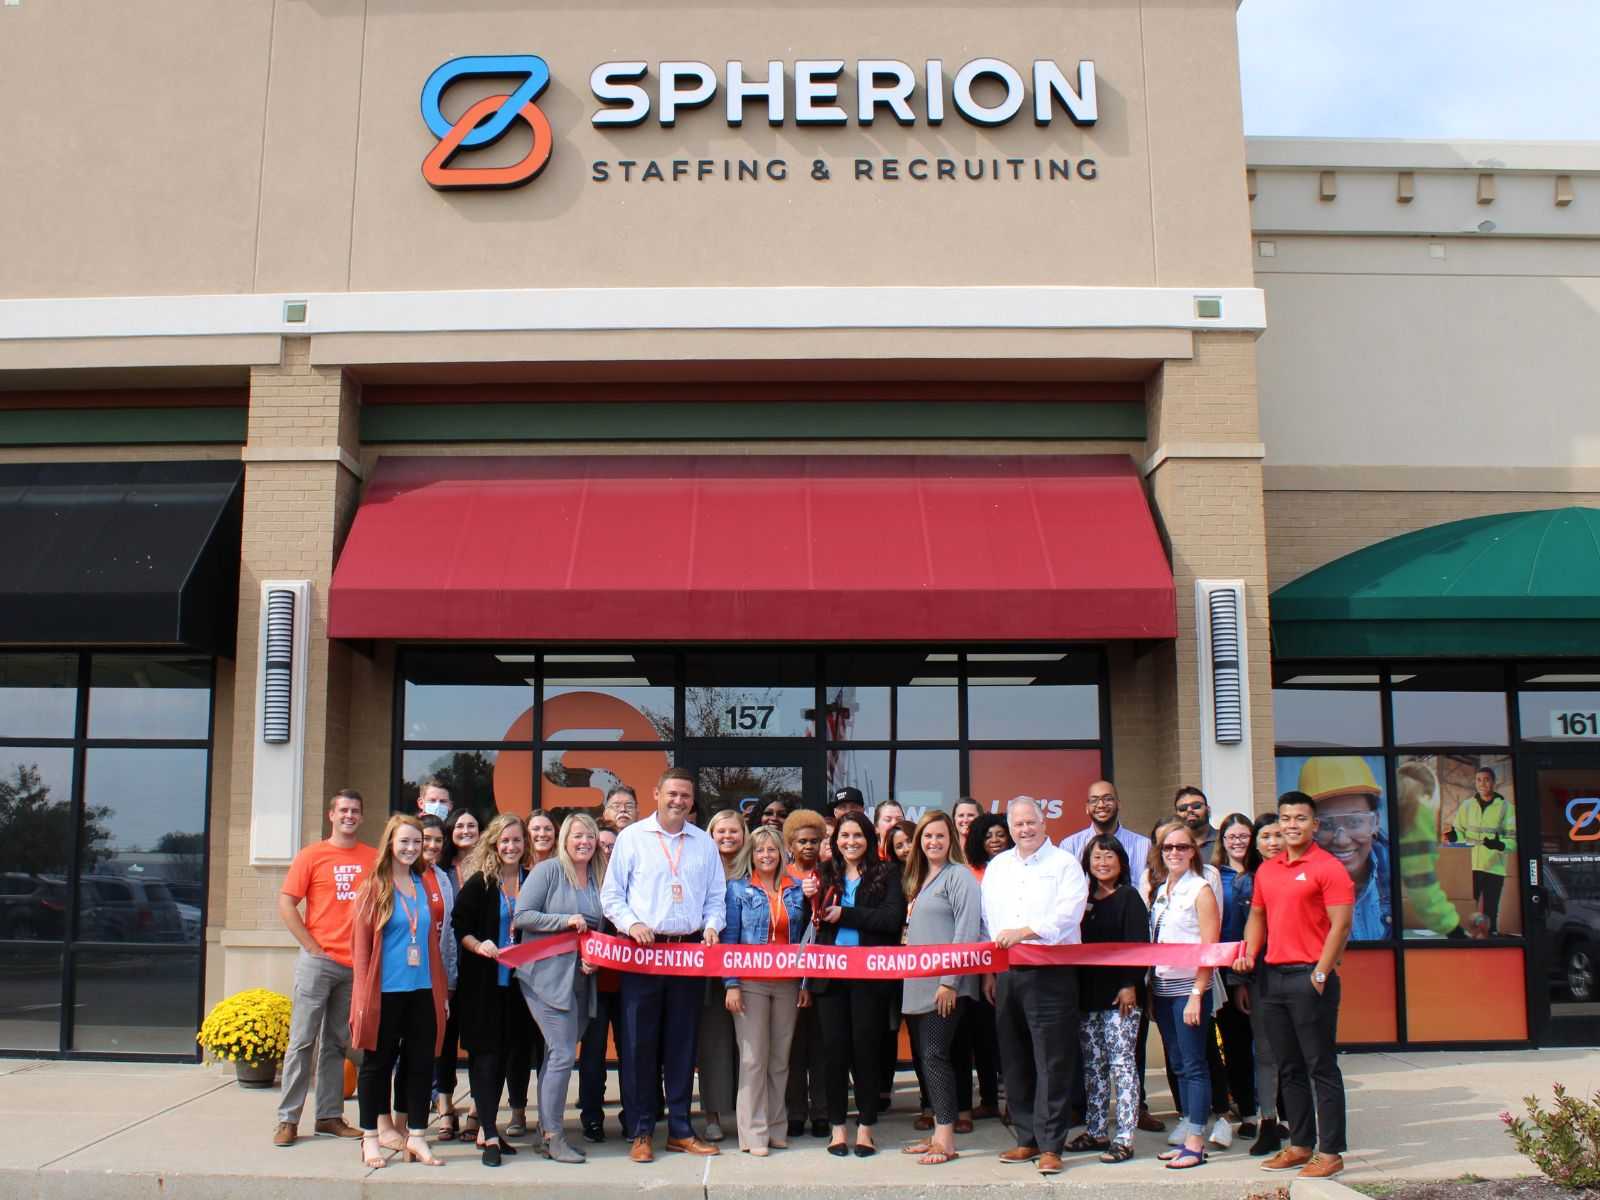 Grand opening of the Spherion Plainfield office. A group of Spherion employees poses with a grand opening ribbon in front of a Spherion storefront.